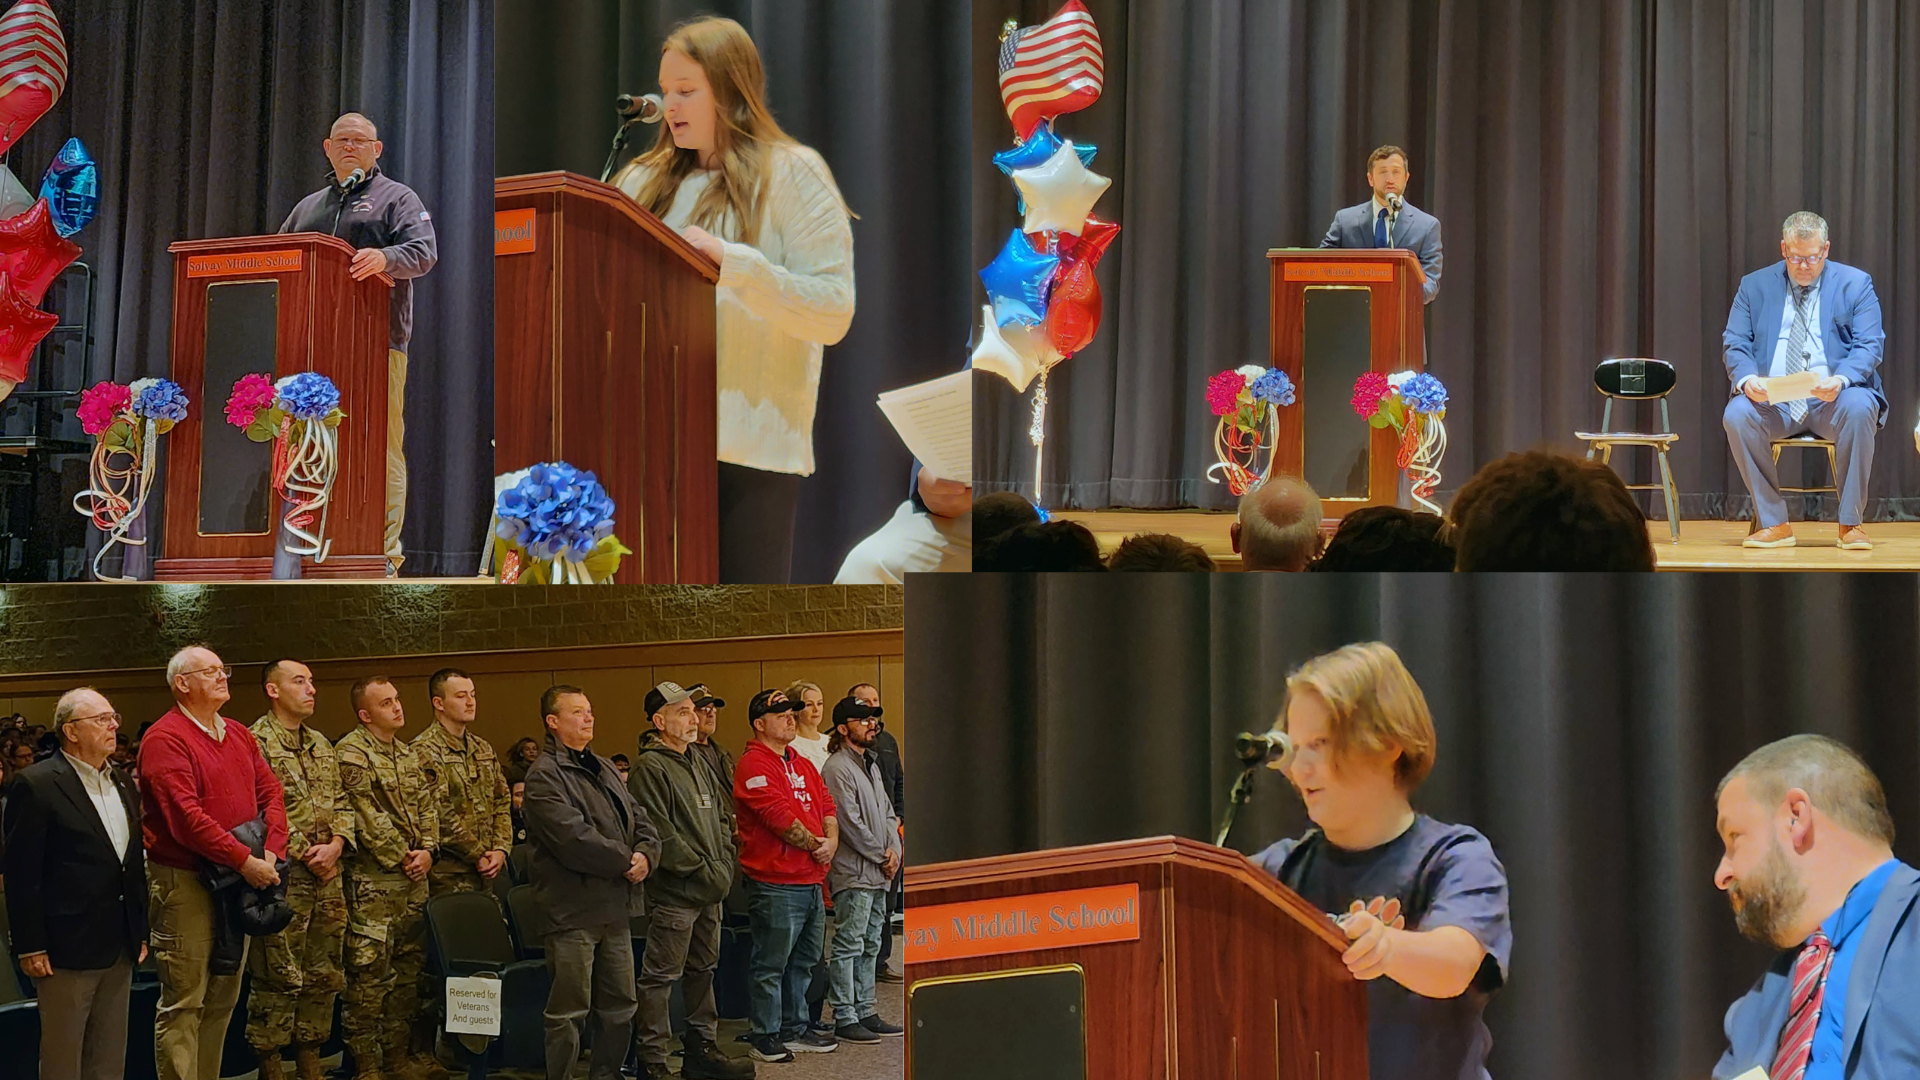 Collage of students and veterans speaking on stage, during assembly for veteran's day